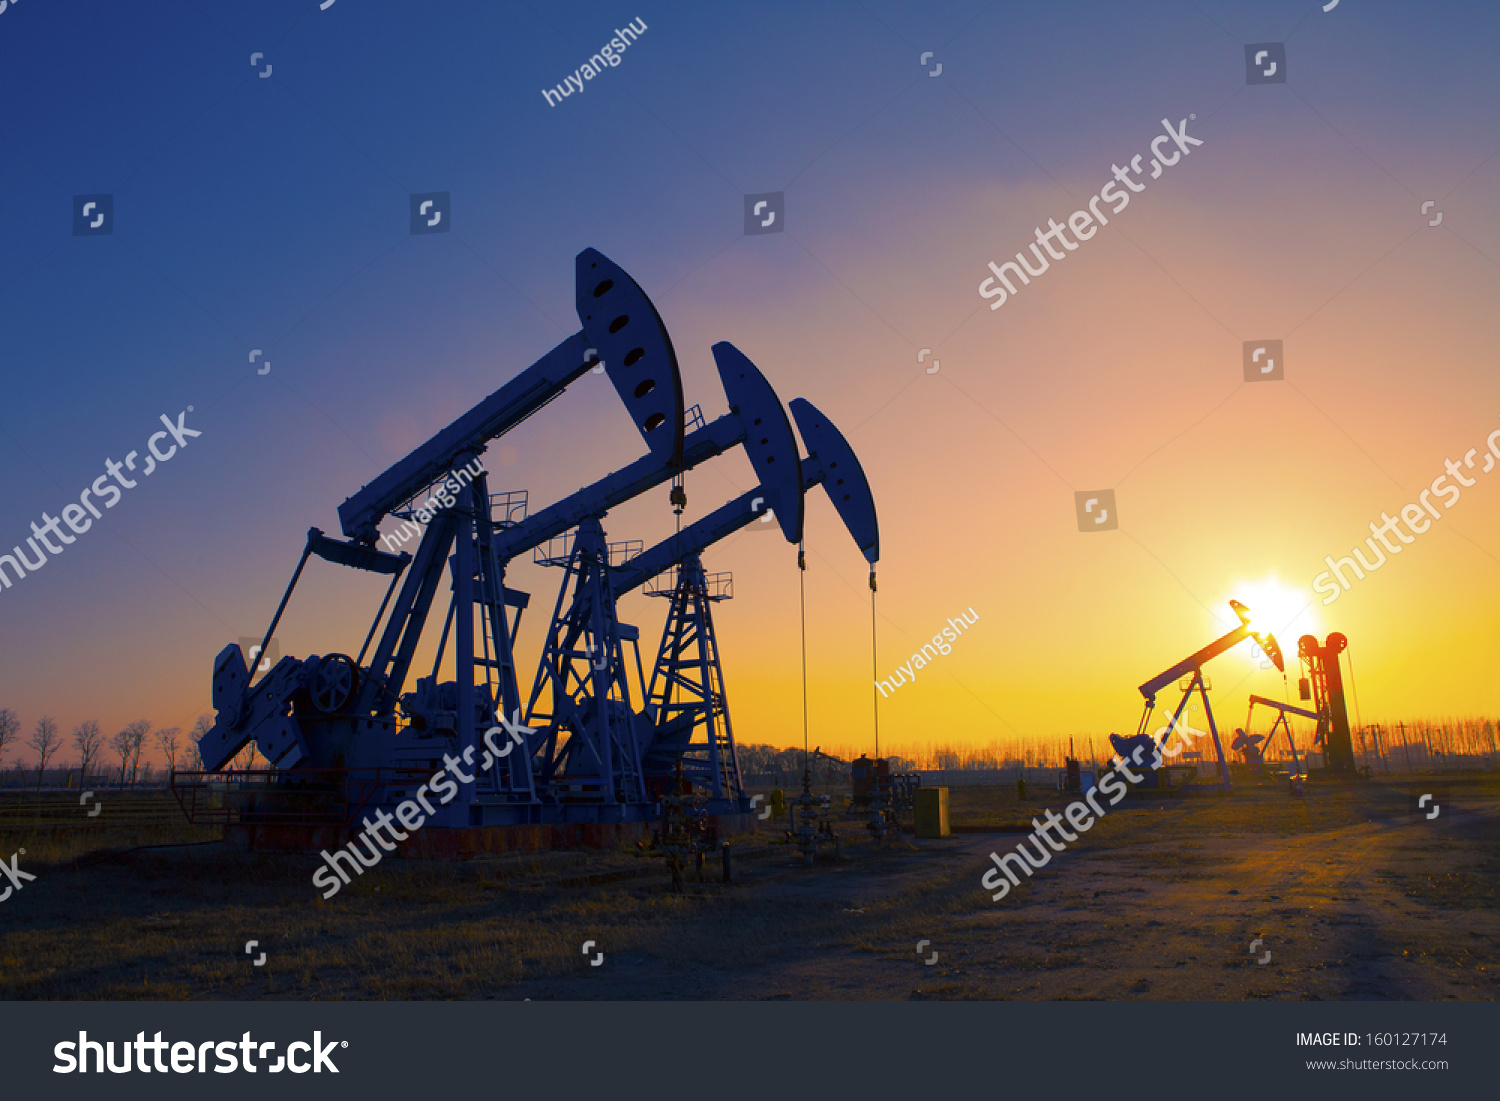 Oil pump oil rig in the sunset background for design #160127174